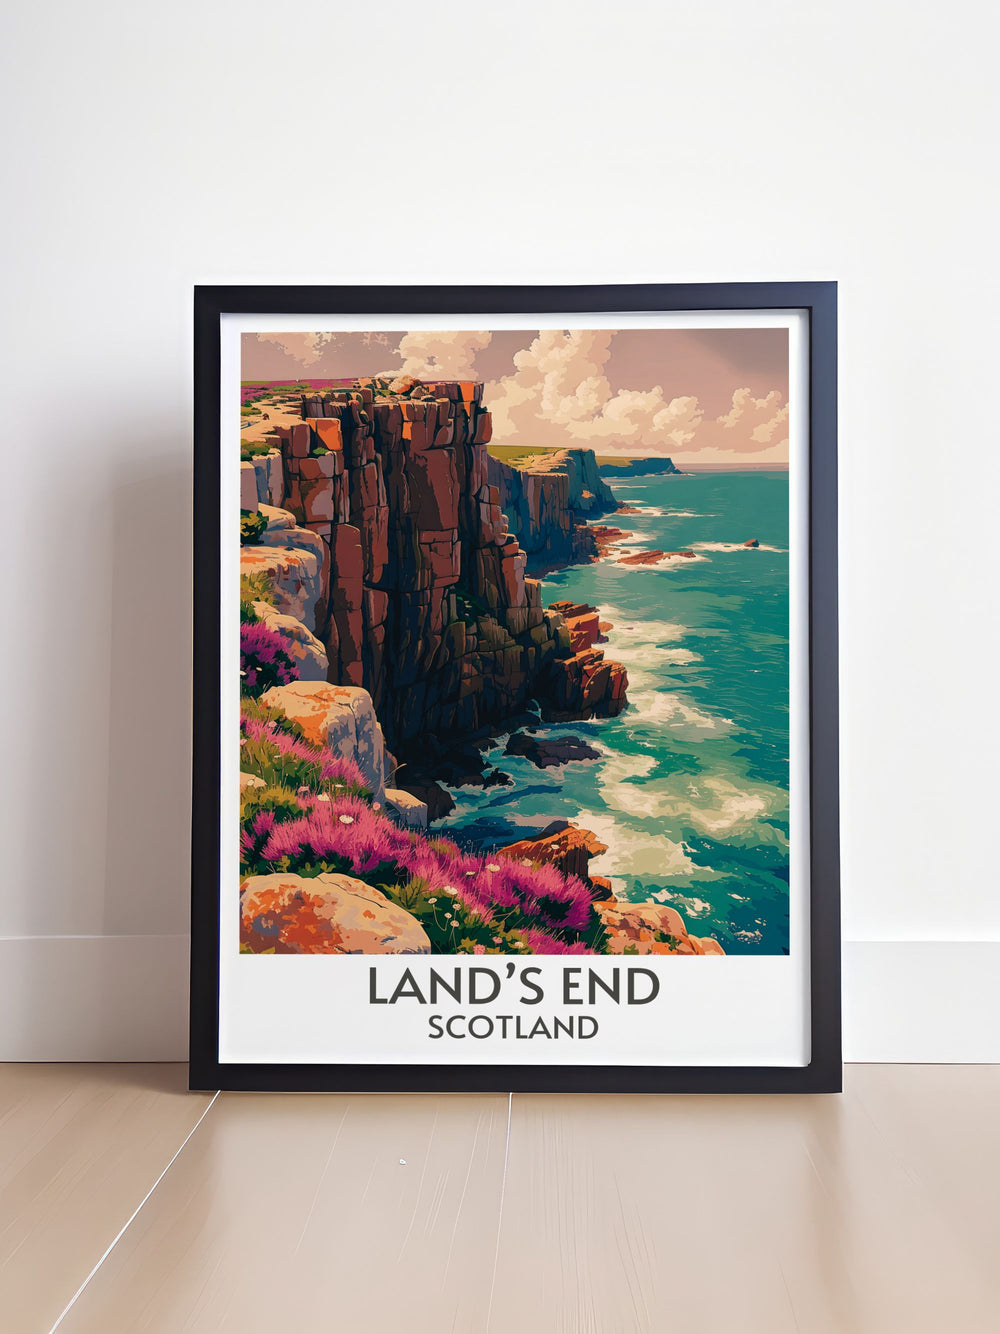 Lands End Scotland Framed Art highlights the raw natural beauty and historical significance of this iconic landmark. The dramatic cliffs and panoramic ocean views are beautifully rendered, making it a must have for enthusiasts of Scottish landscapes.